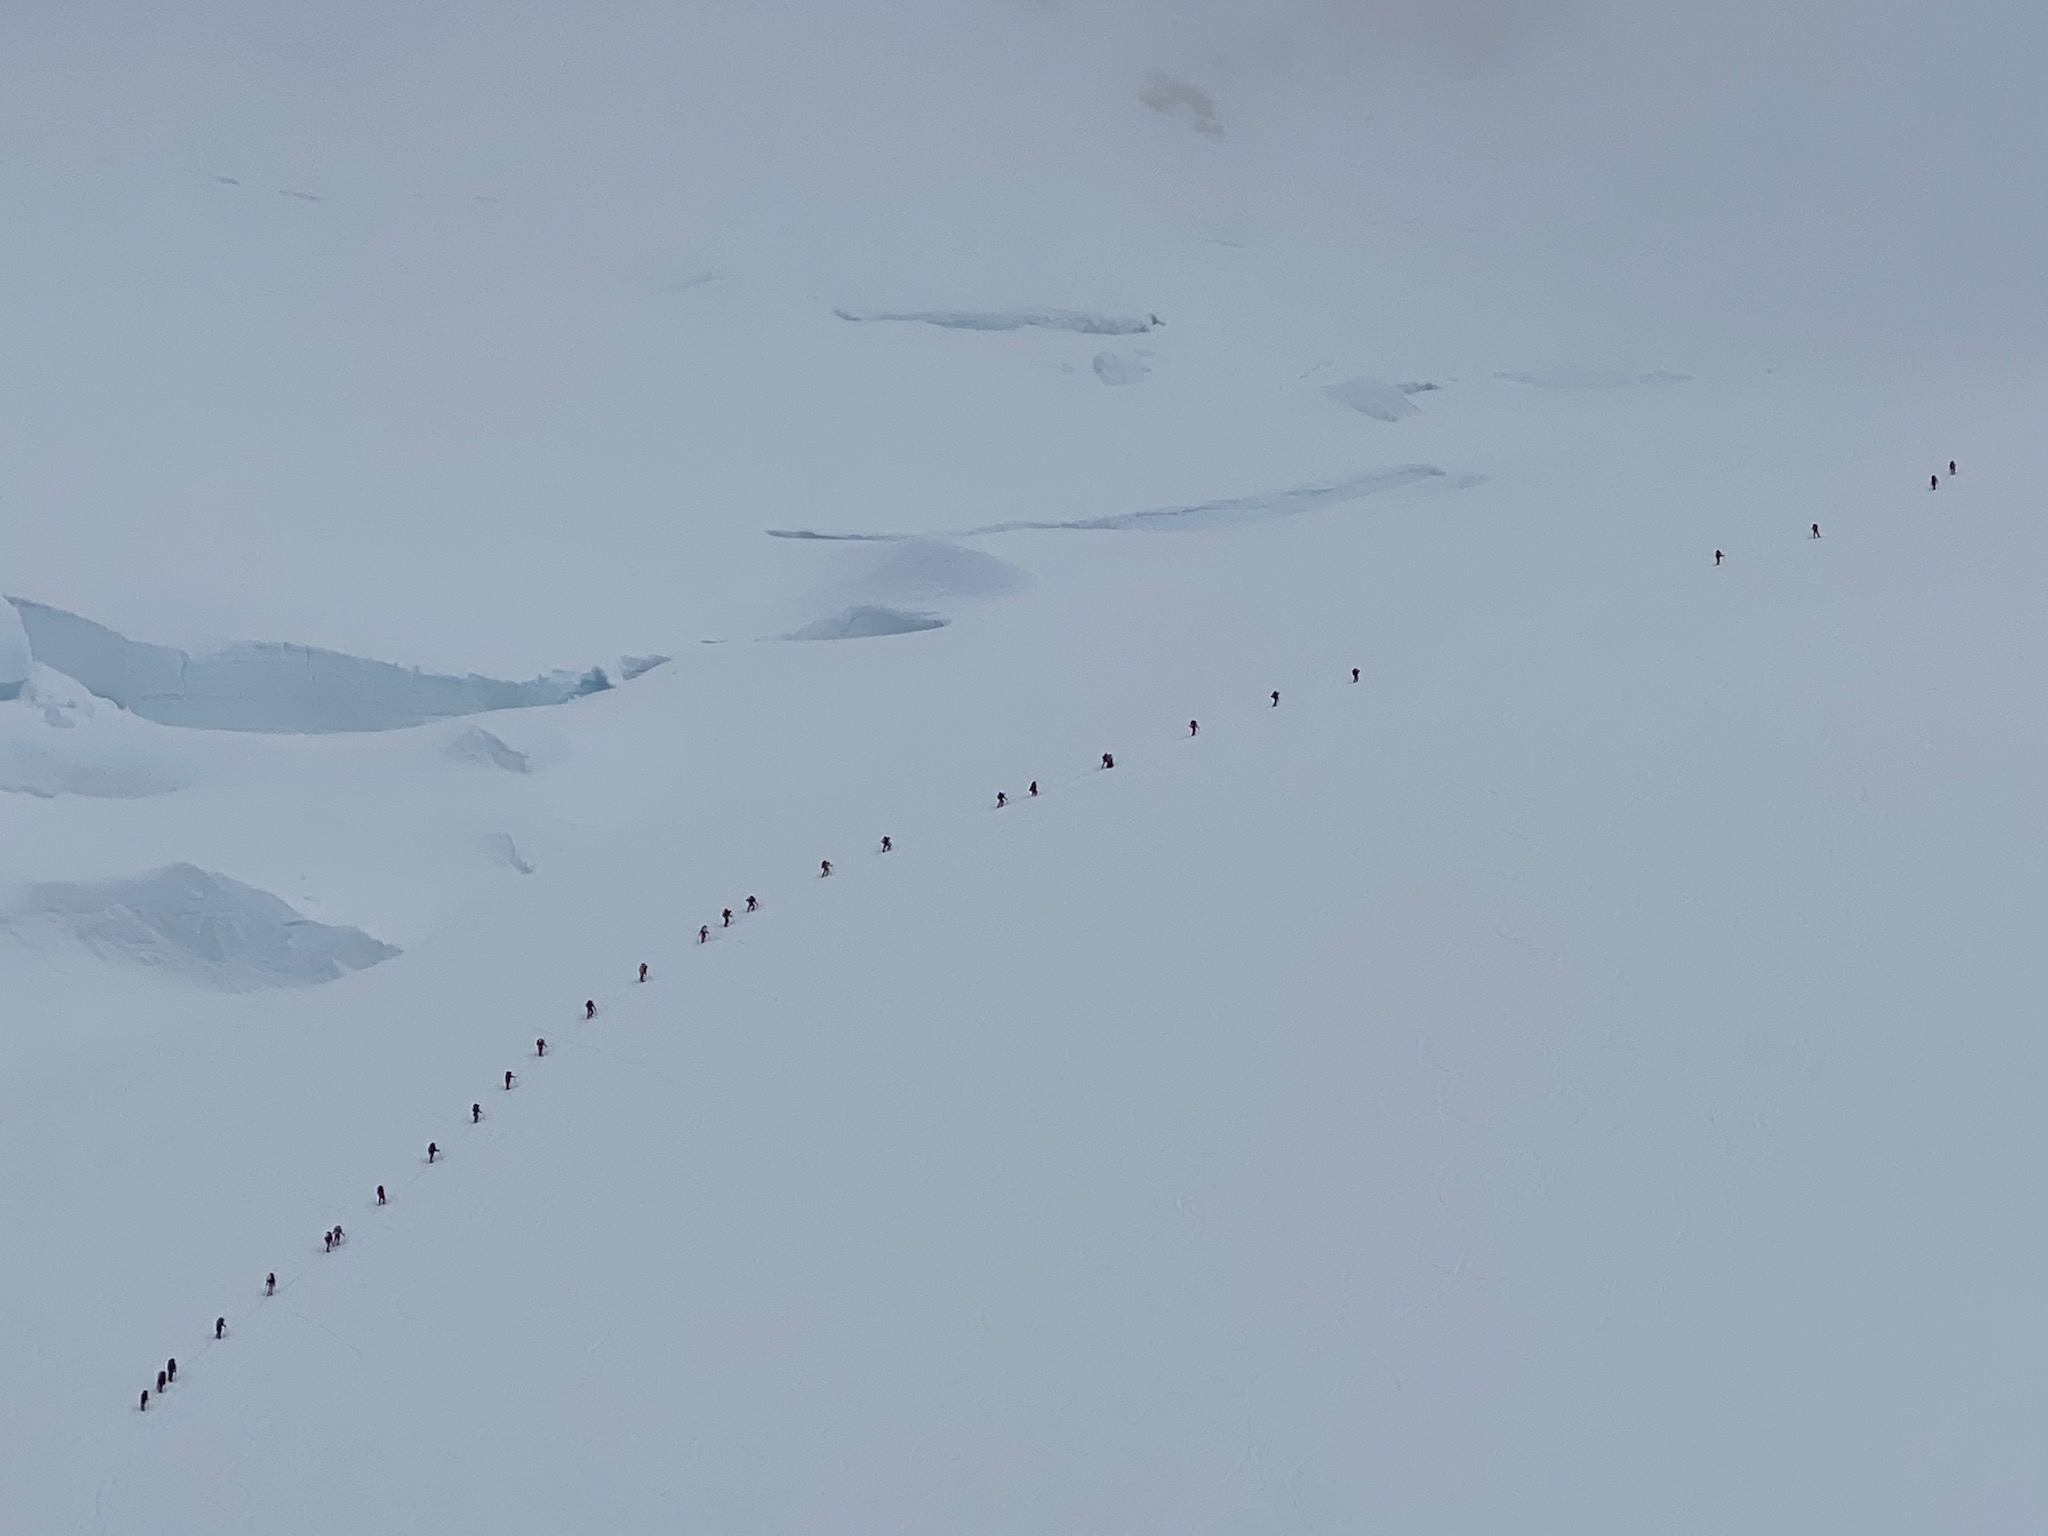 A line of climbers march upwards